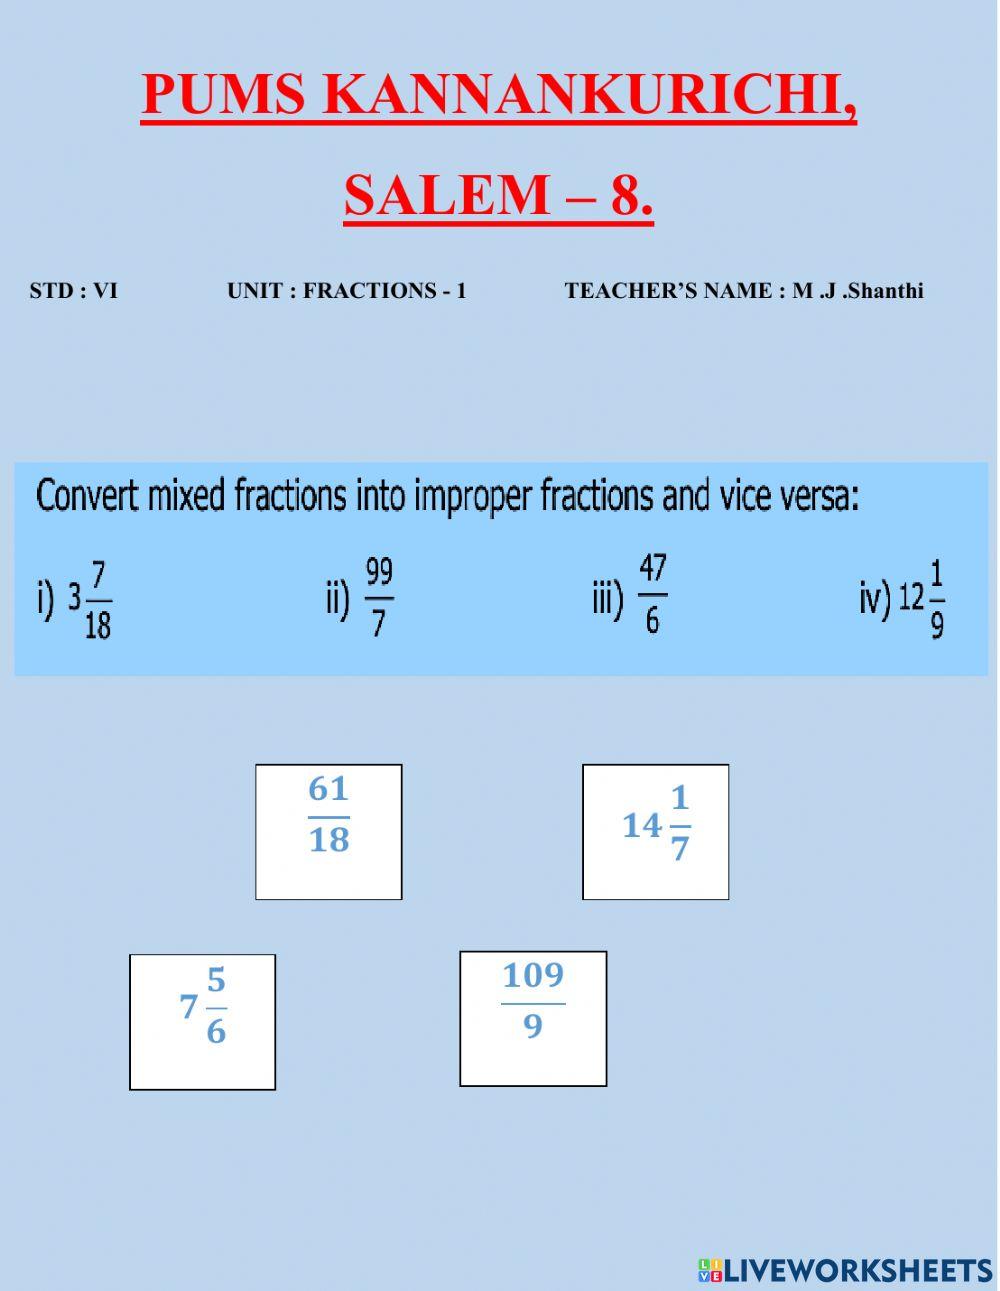 3-fractions-1